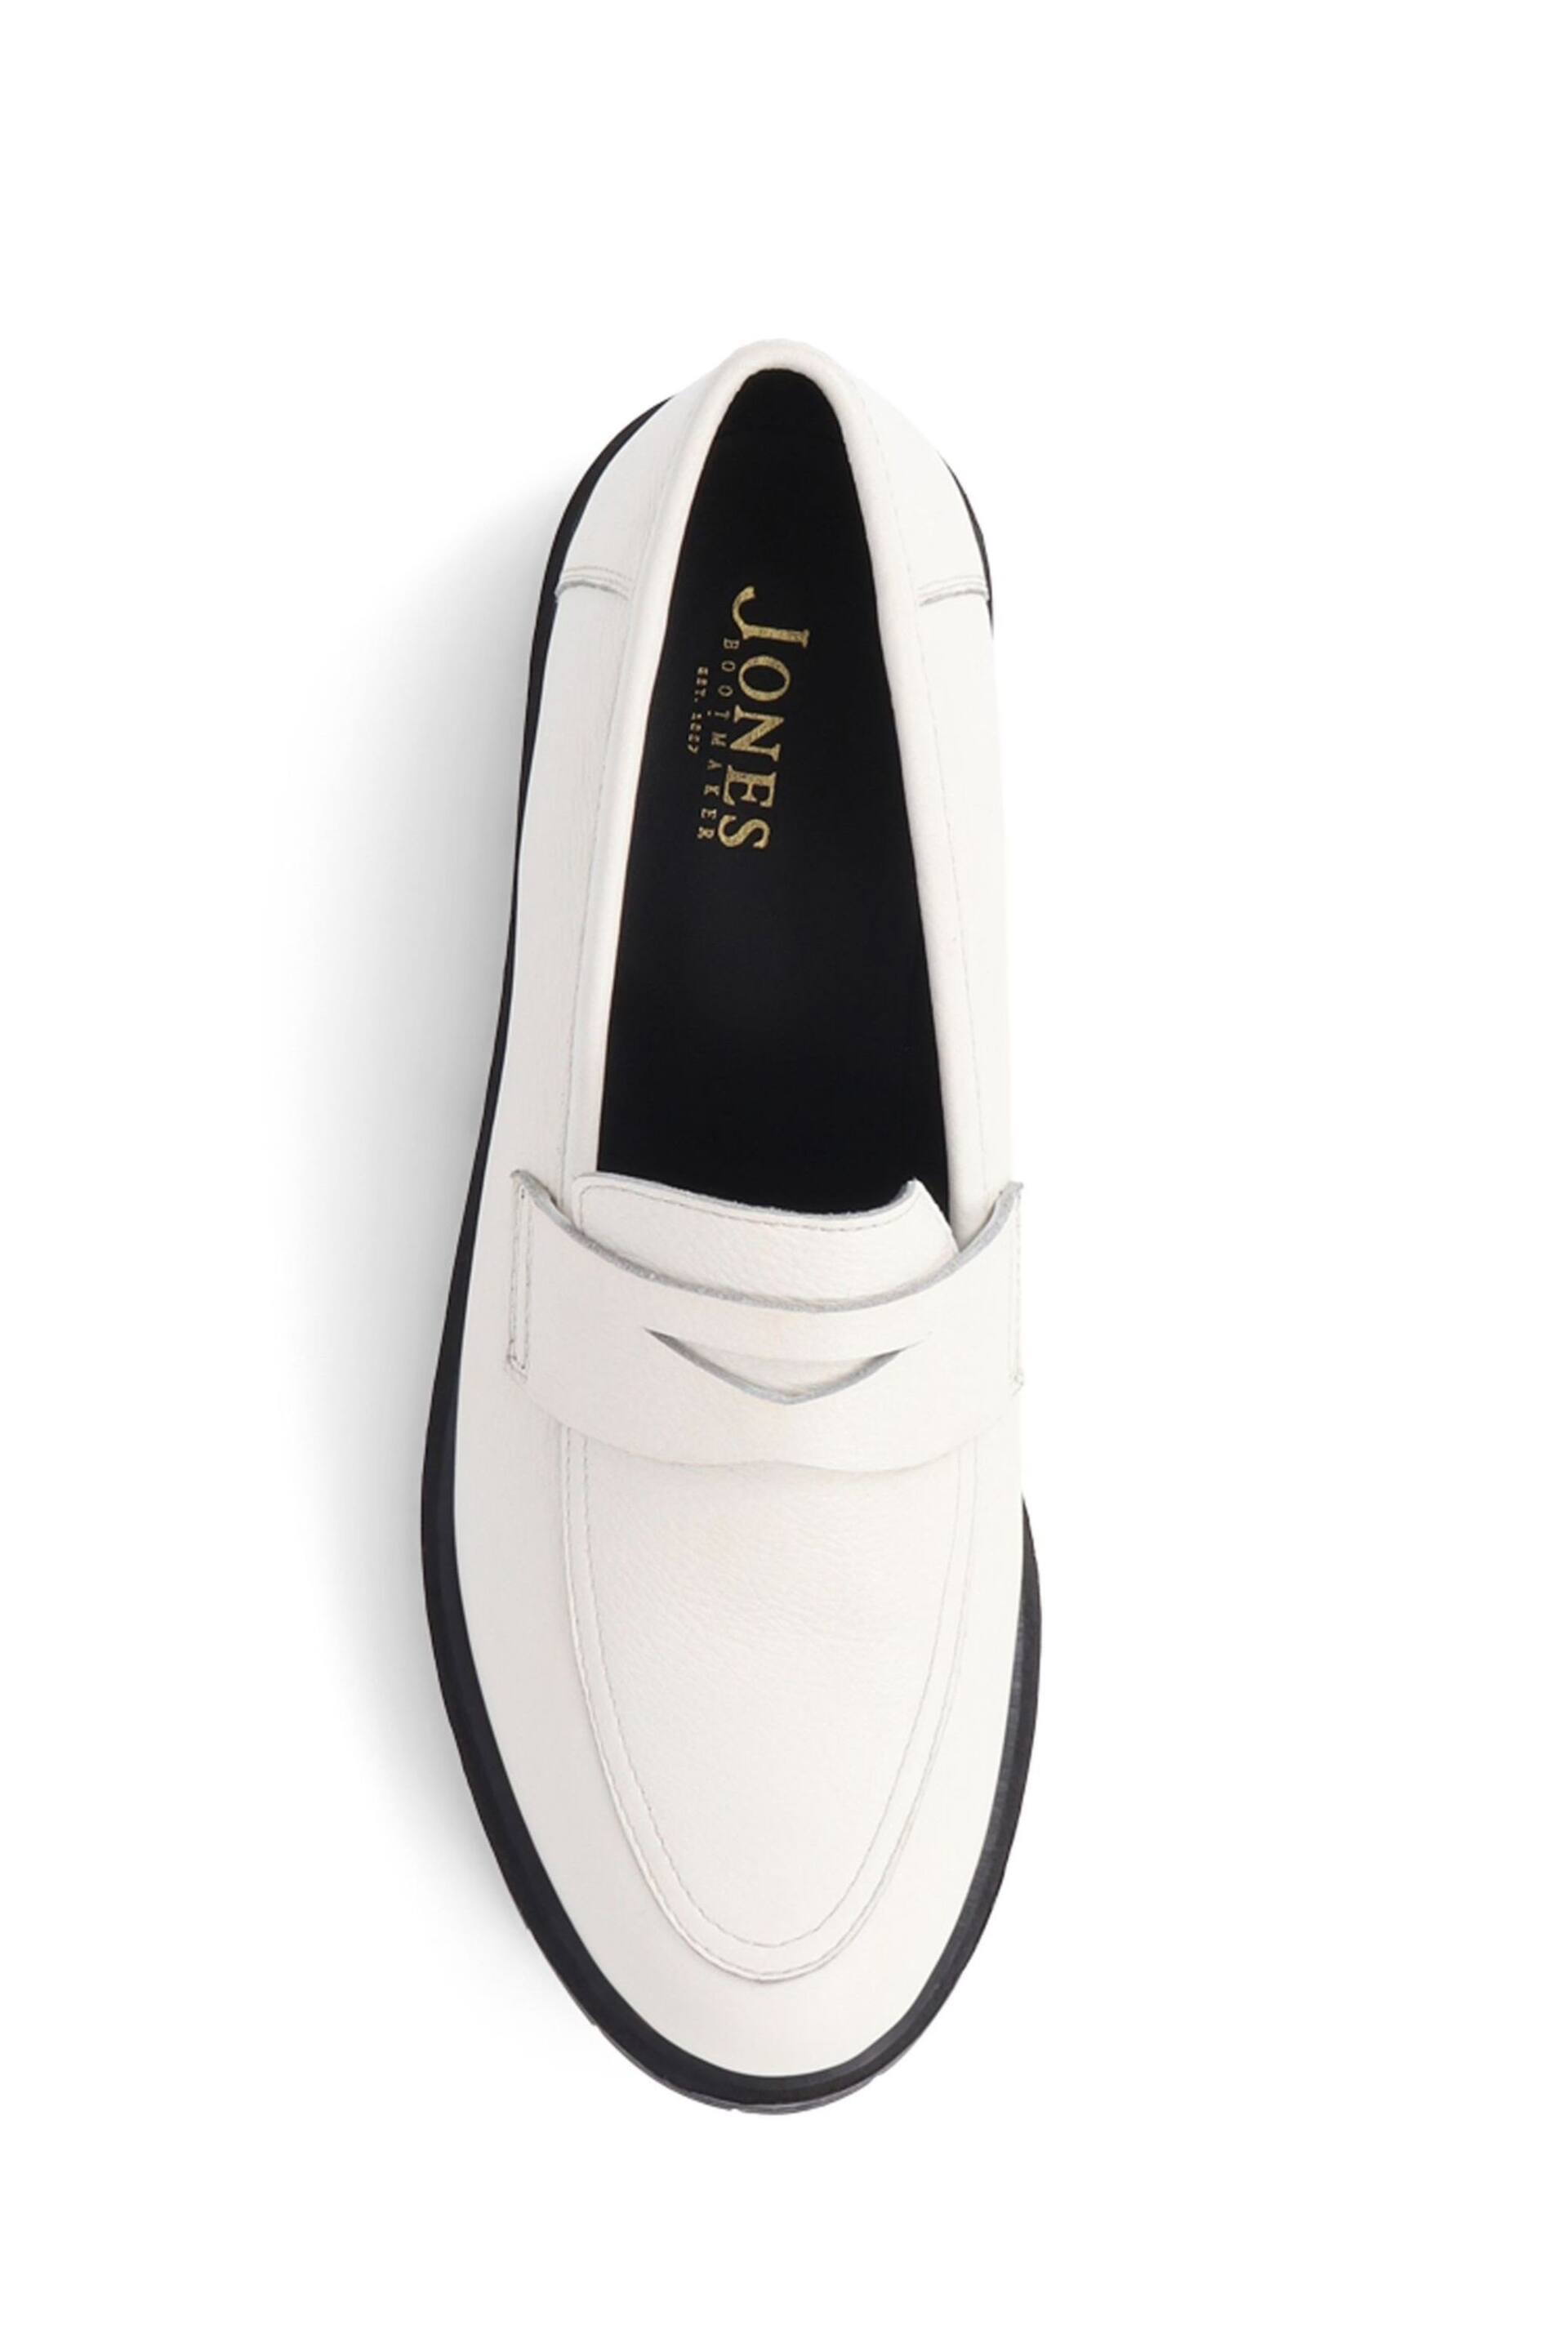 Jones Bootmaker Dara2 Leather White Loafers - Image 3 of 5